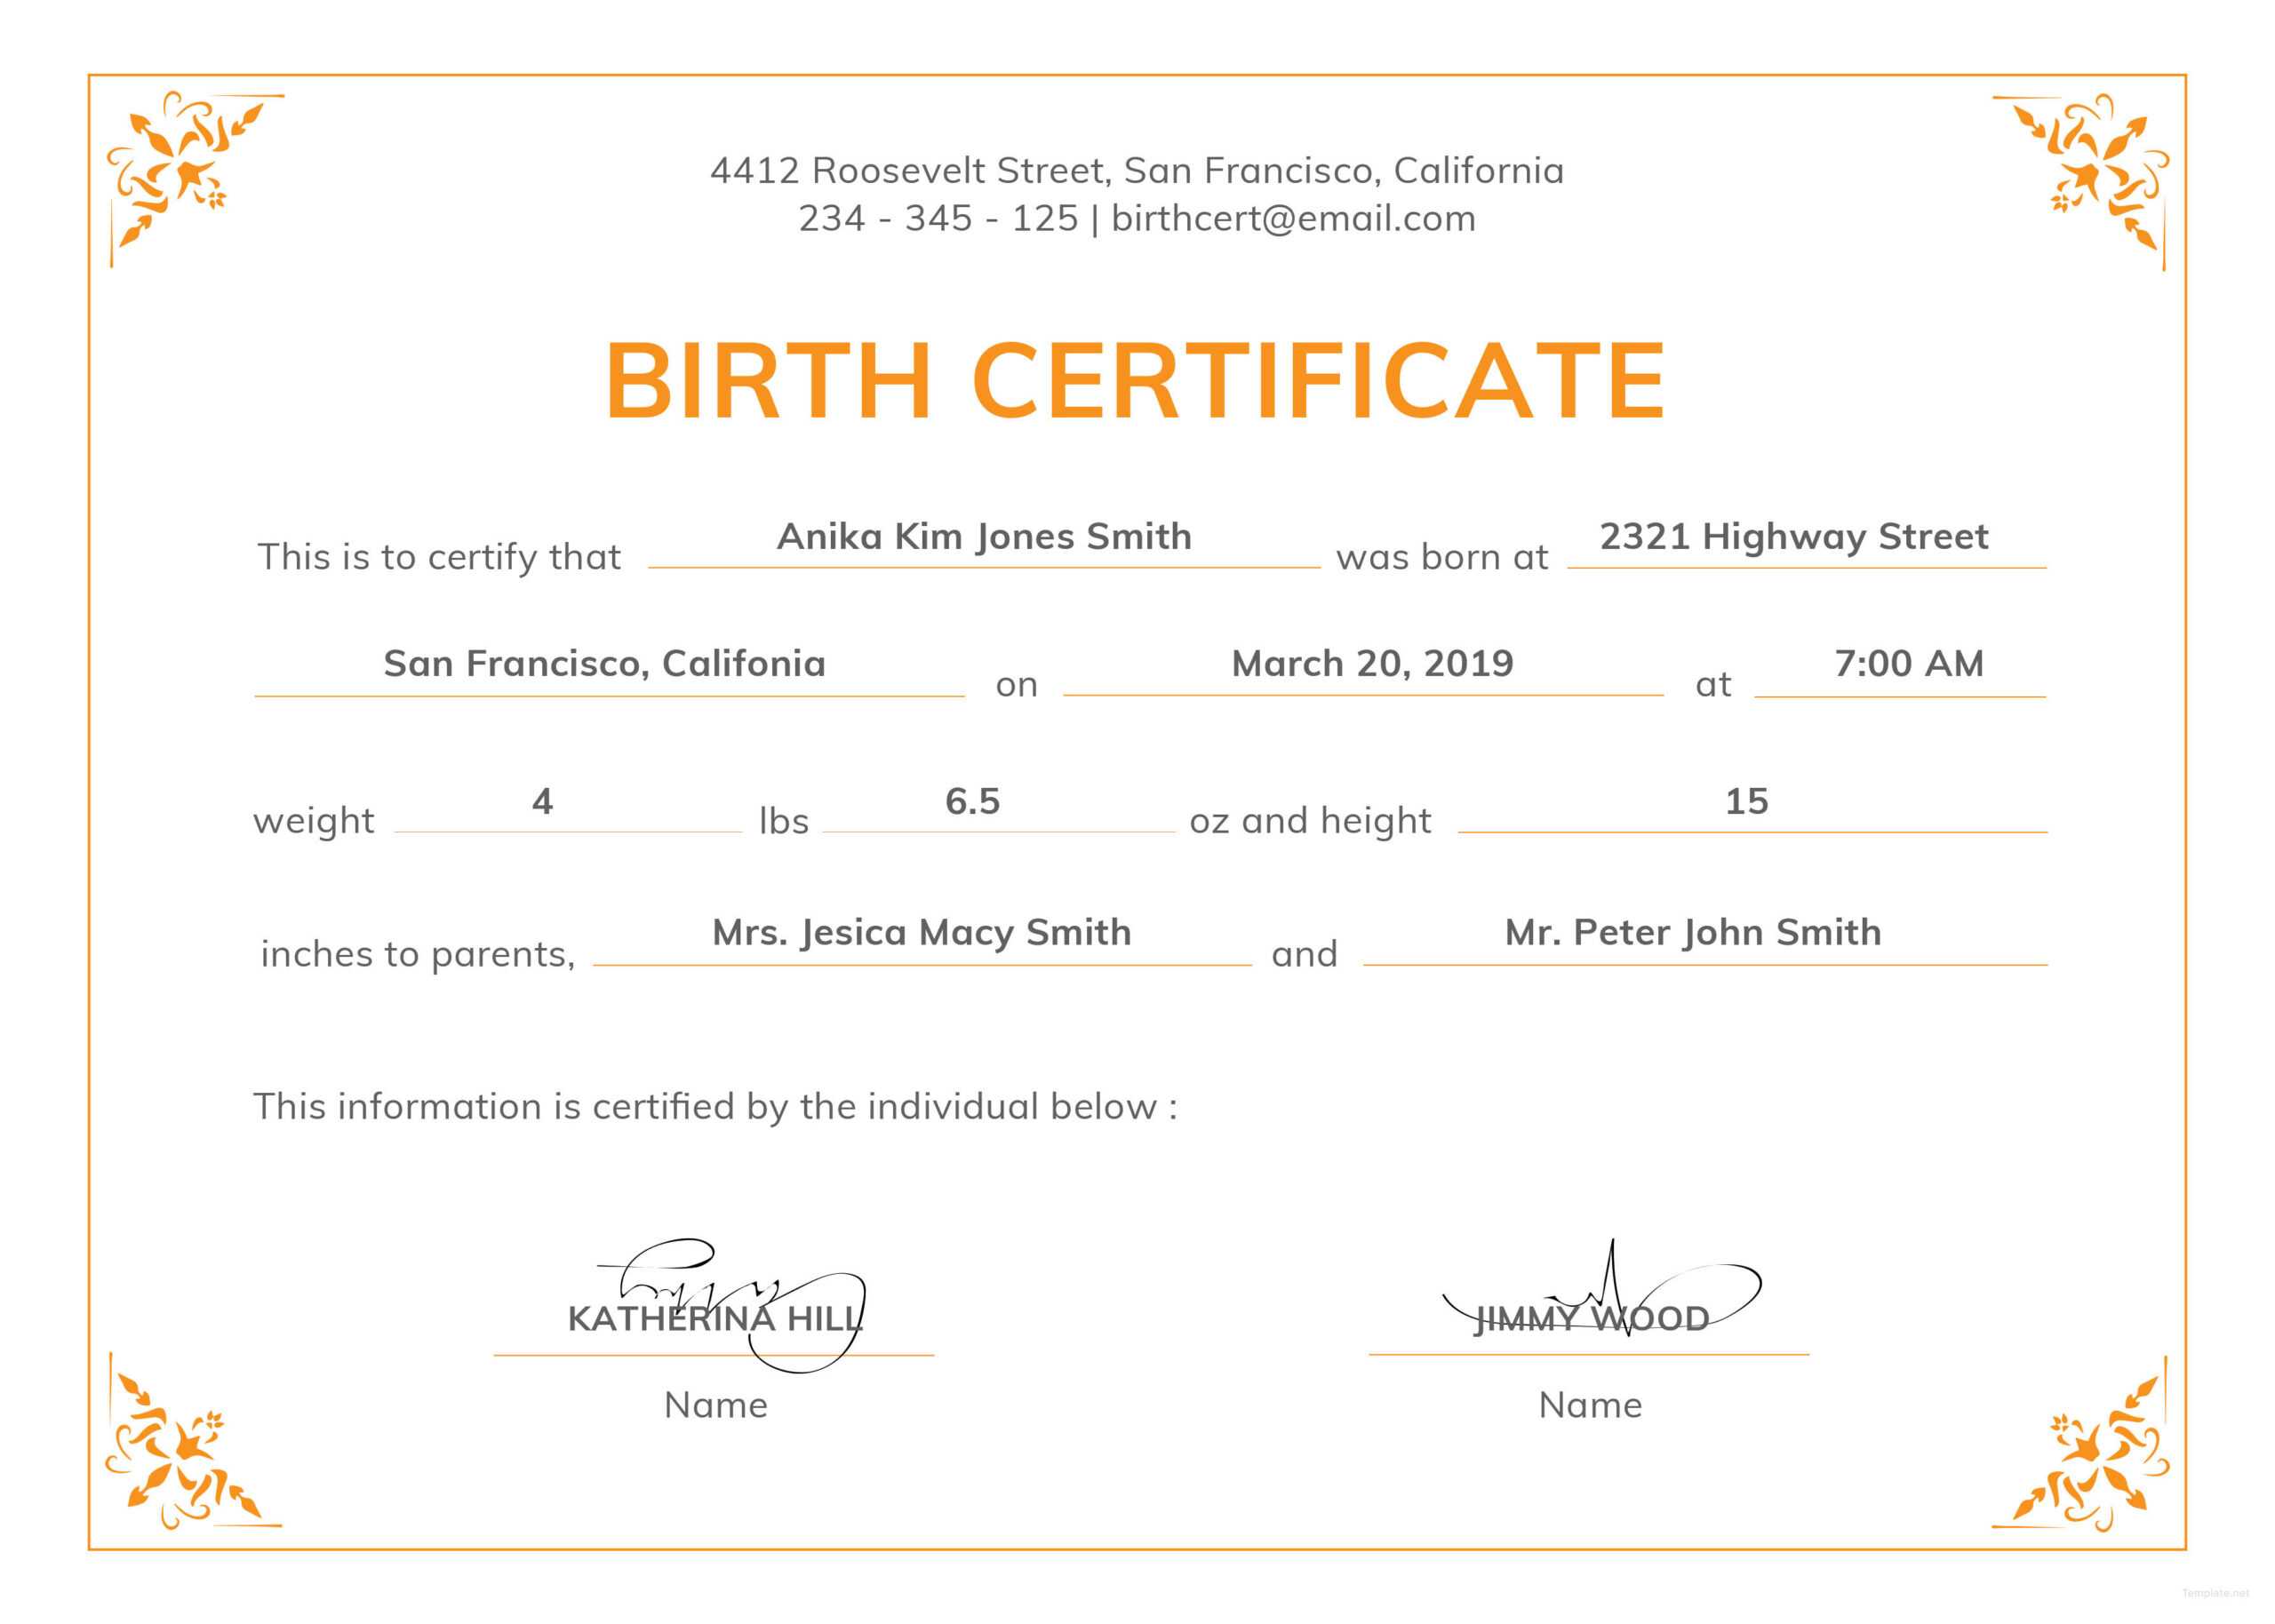 Can Make A Delivery Certificate Crucial | Gift Certificate Within Editable Birth Certificate Template